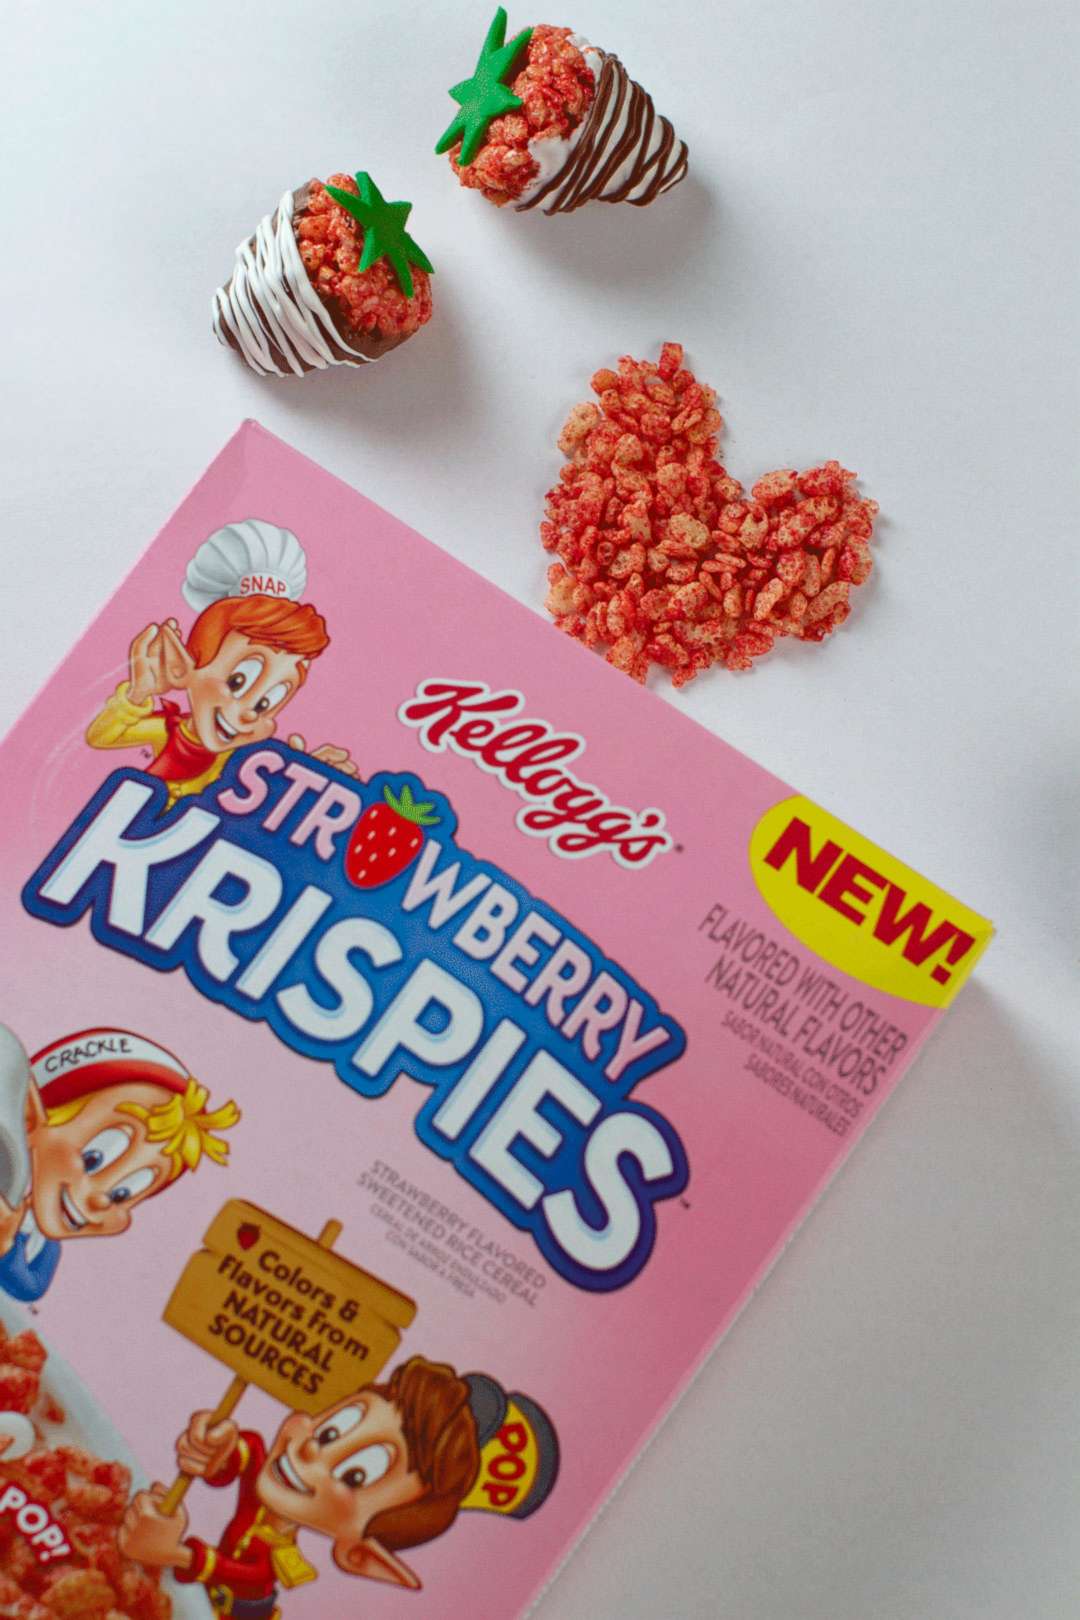 PHOTO: Chocolate-covered Strawberry Krispies Treats are a perfect Valentine's Day treat!